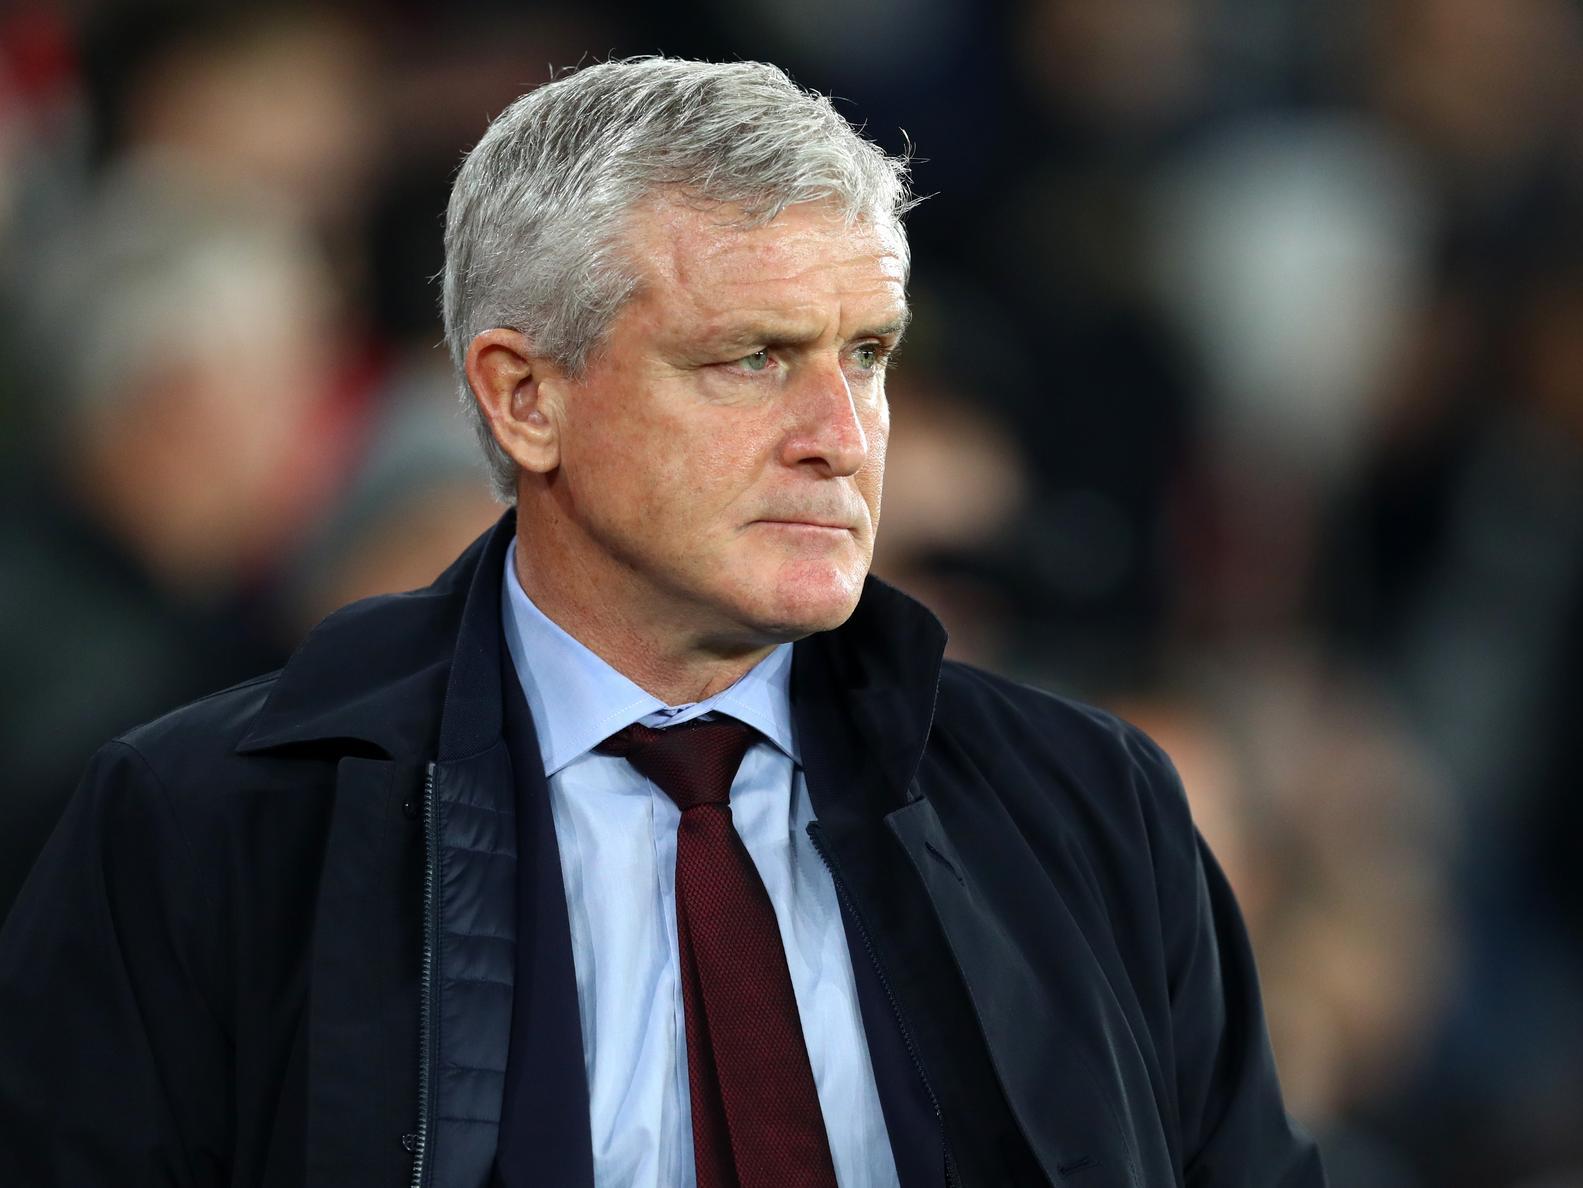 Mark Hughes has surged up the odds ranking as Cardiff City continue to hunt for a new manager. However, ex-Millwall manager Neil Harris is still the bookies' favourite. (Sky Bet)